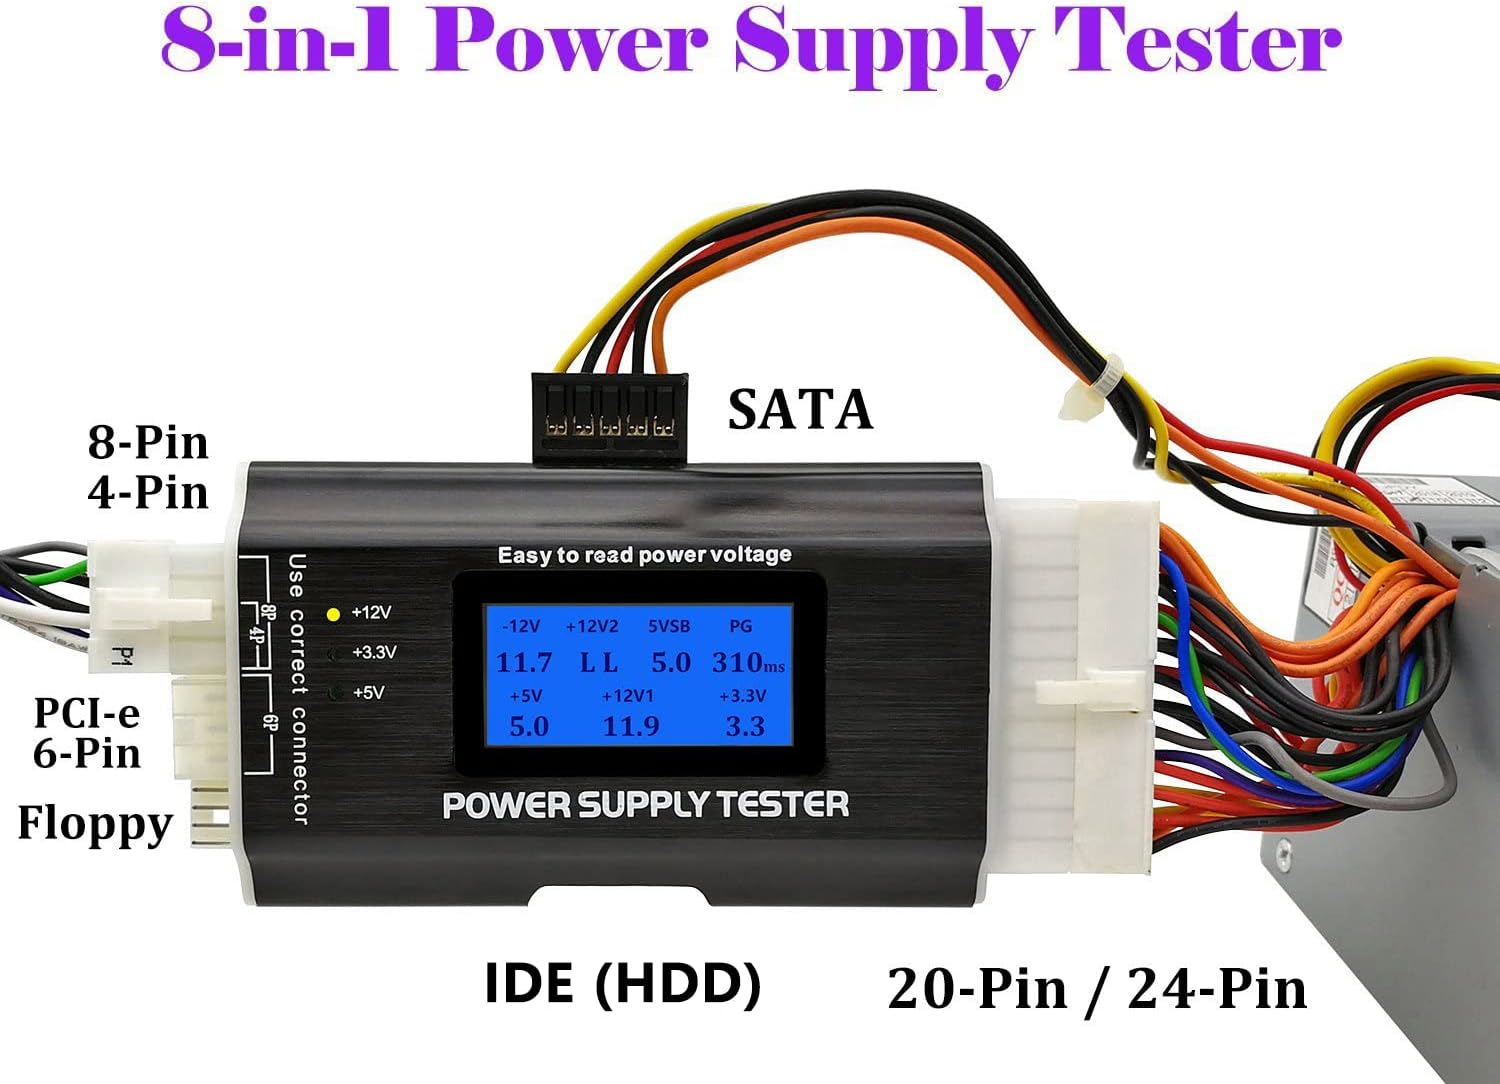 Computer PC Power Supply Tester, ATX/ITX/IDE/HDD/SATA/BYI Connectors Power Supply Tester, 1.8'' LCD Screen (Aluminum Alloy Enclosure) - image 4 of 7